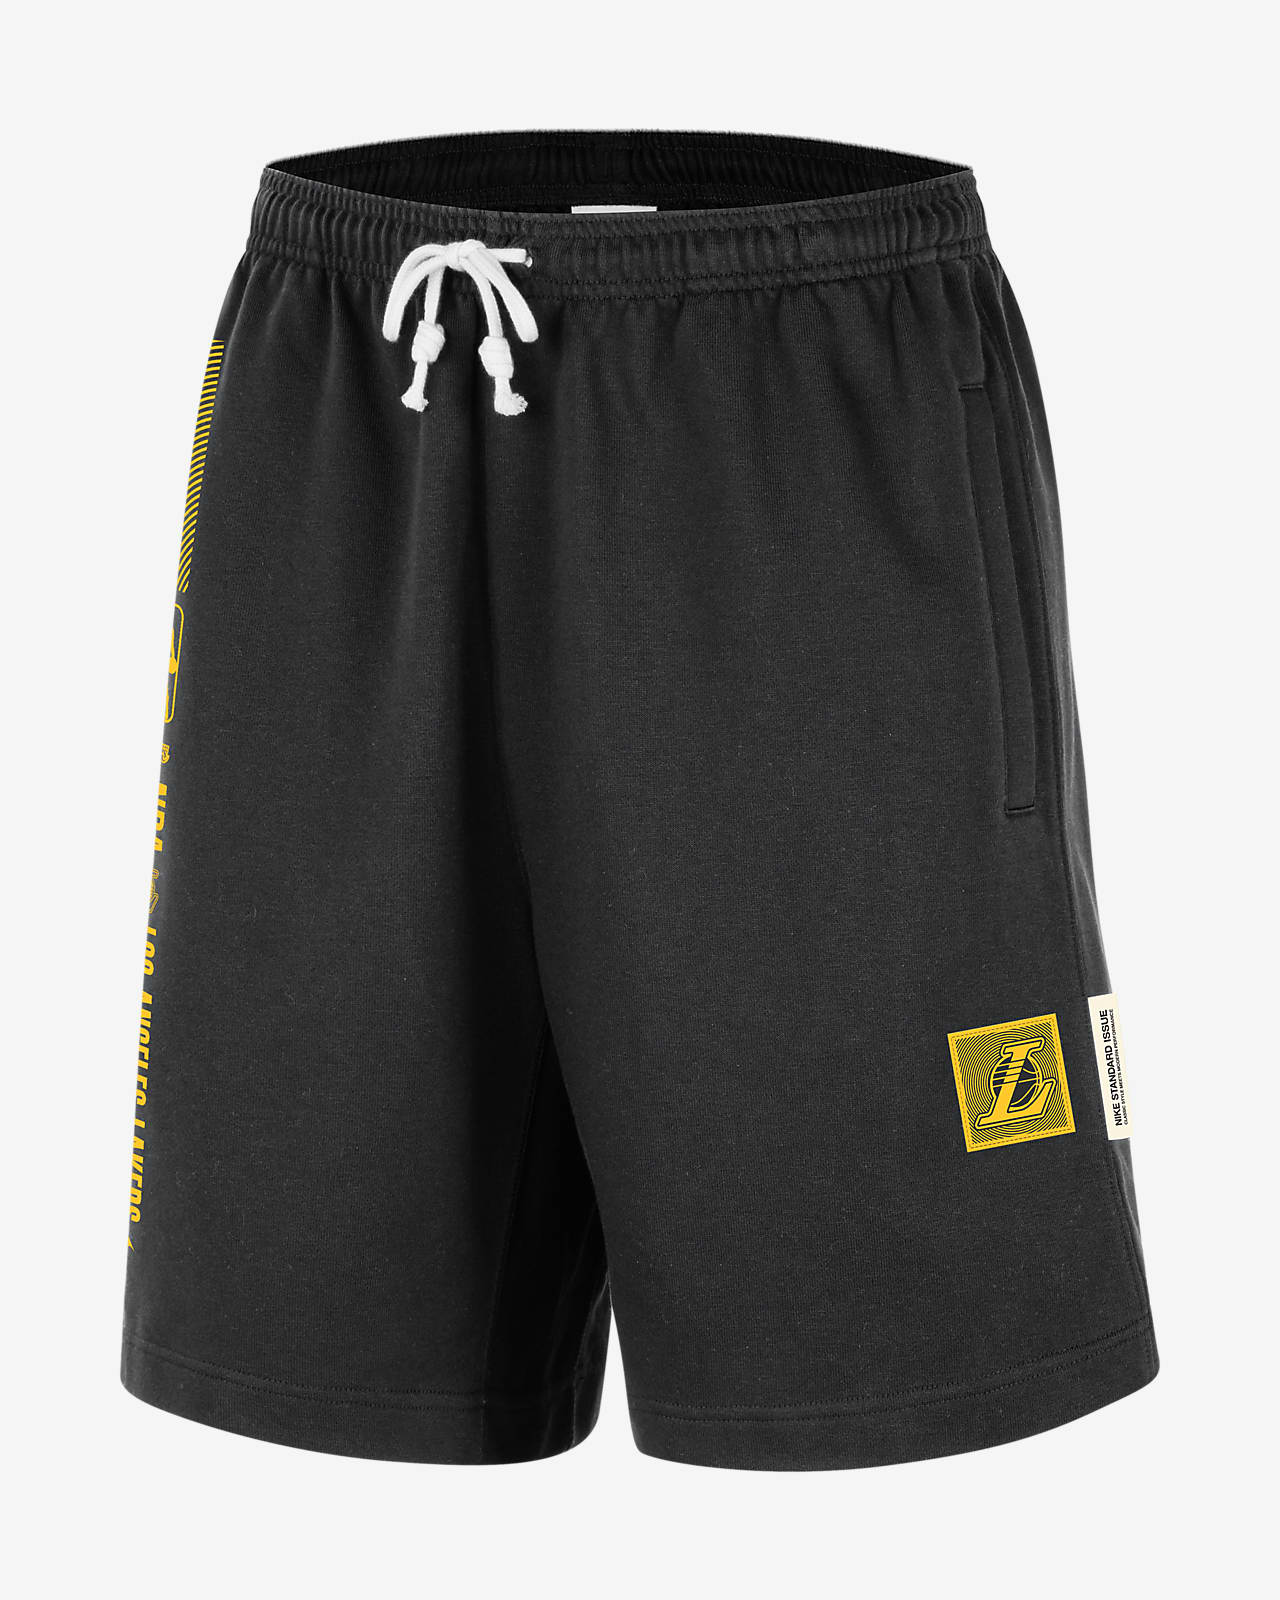 Los Angeles Lakers Standard Issue Courtside Men's Nike Dri-FIT NBA Shorts